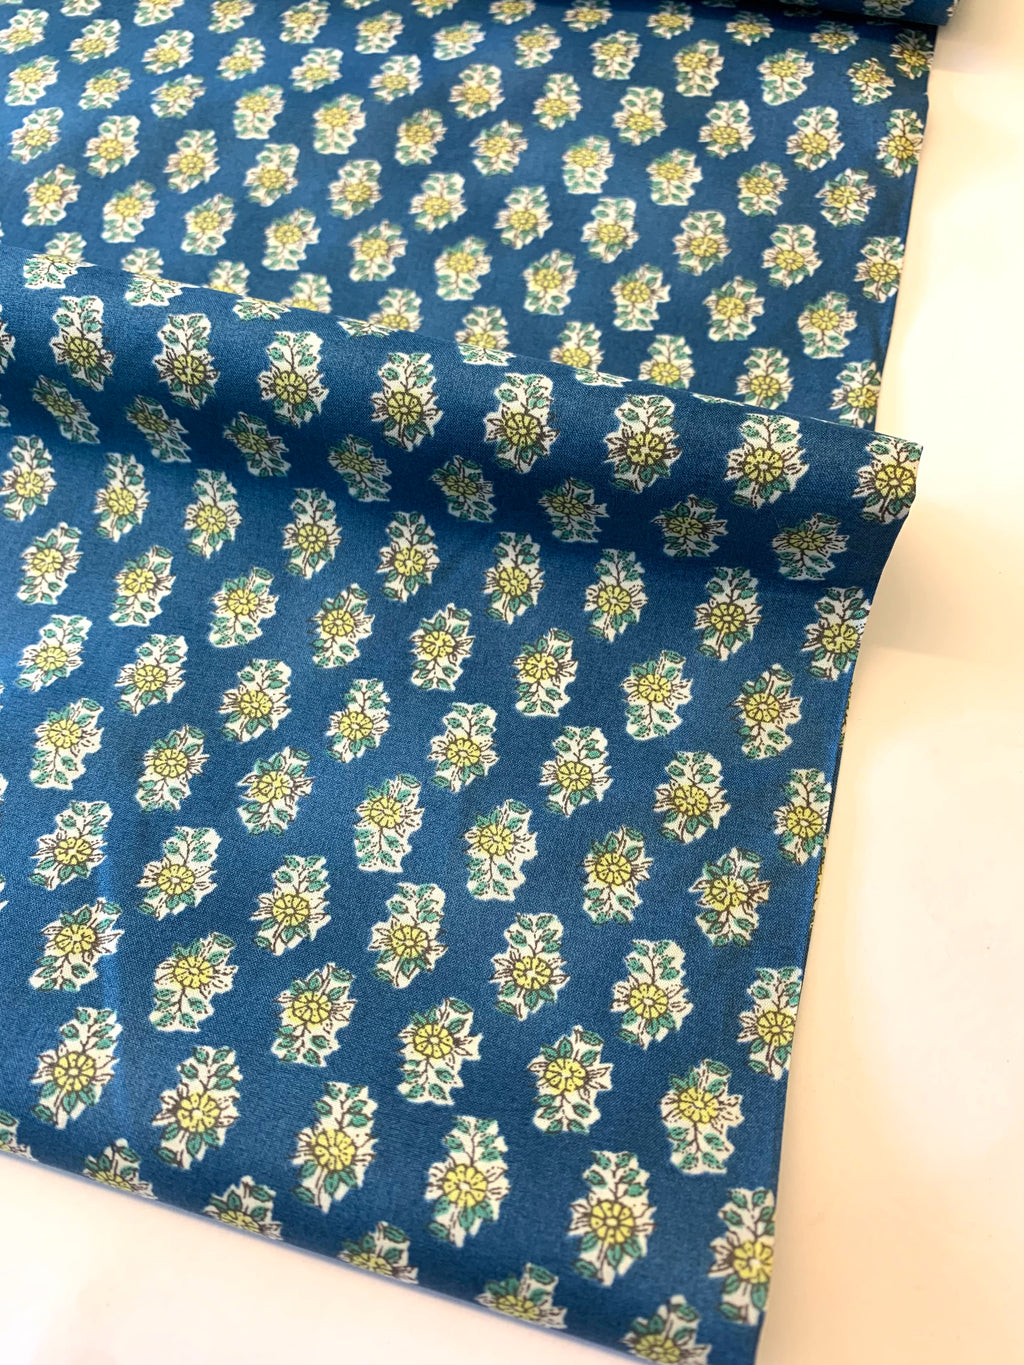 Kokka Japanese Cotton/ Ditsy Cottage Floral in Blue